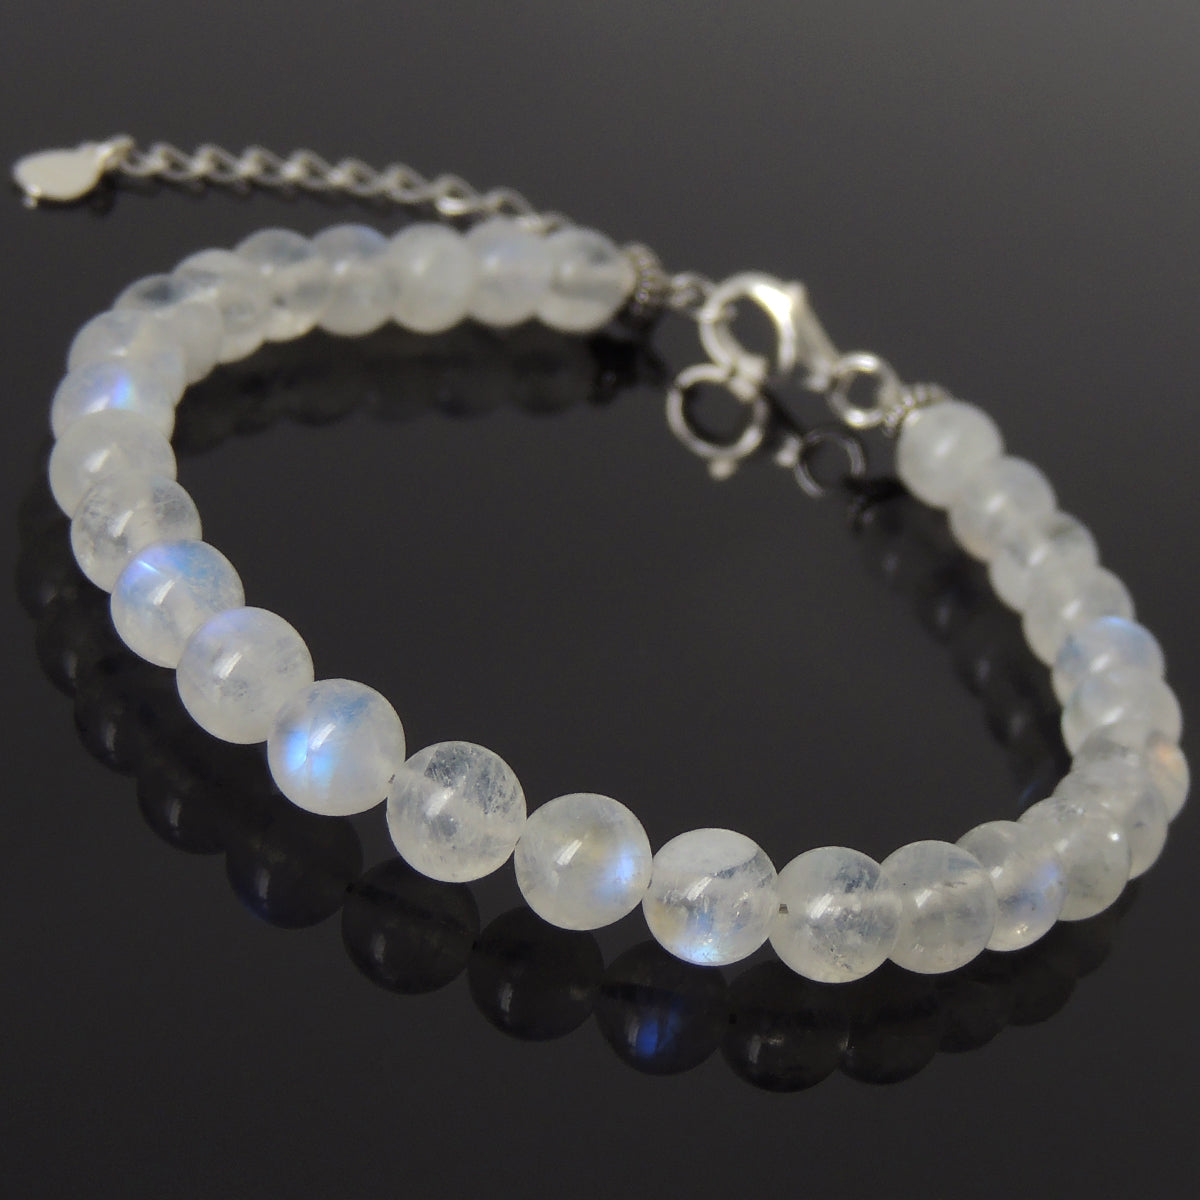 6mm Grade AA Flashing Moonstone Healing Gemstone Bracelet with S925 Sterling Silver Chain & Clasp - Handmade by Gem & Silver BR1246